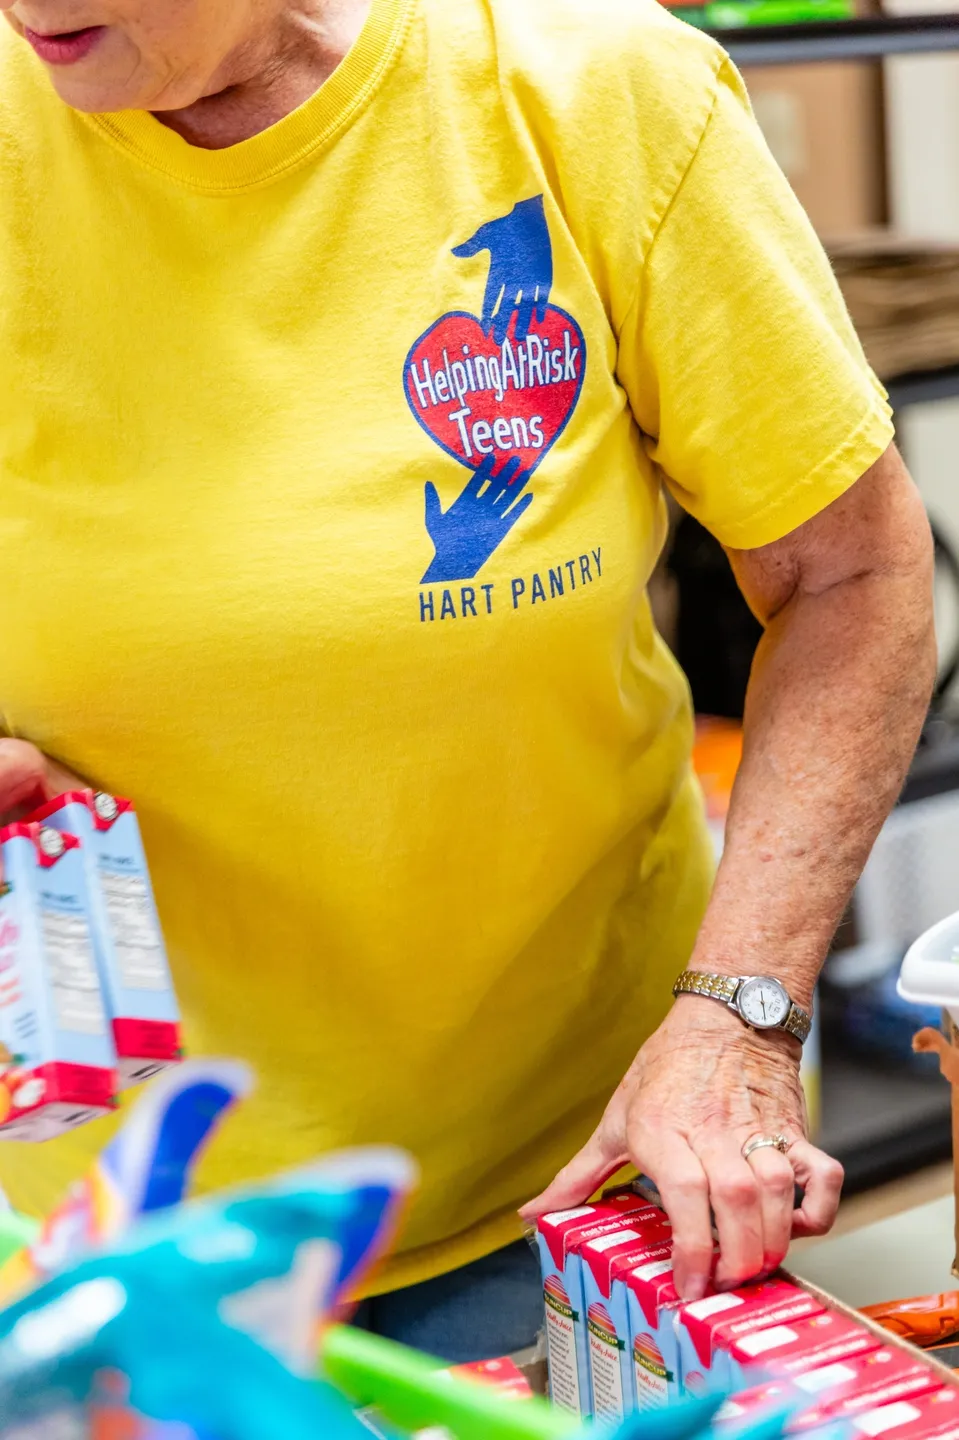 A woman in yellow shirt holding onto some bags